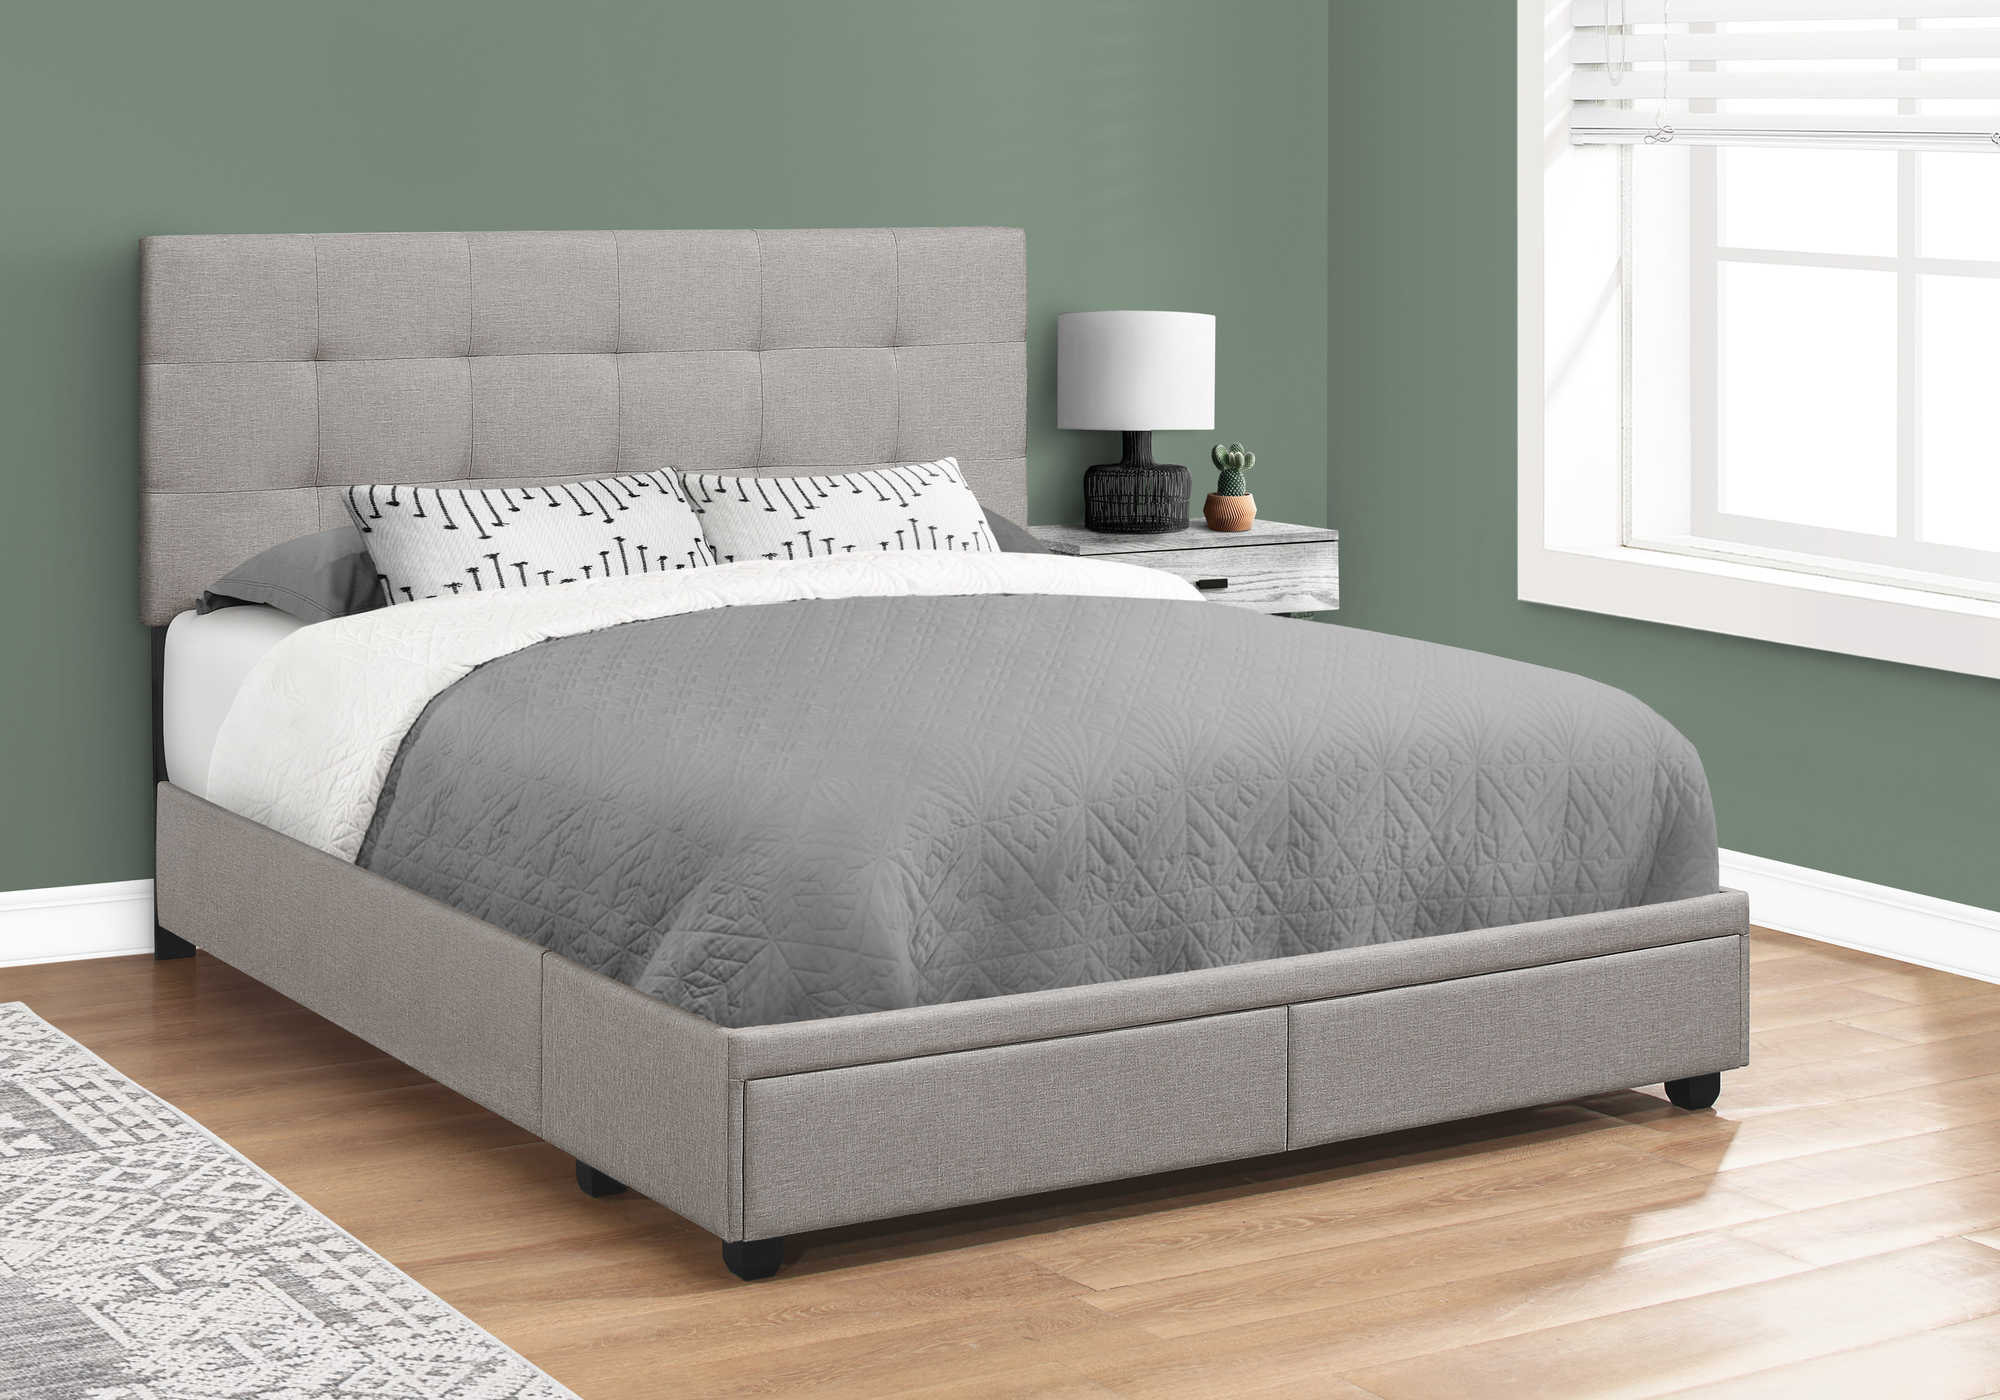 BED - QUEEN SIZE / GREY LINEN WITH 2 STORAGE DRAWERS